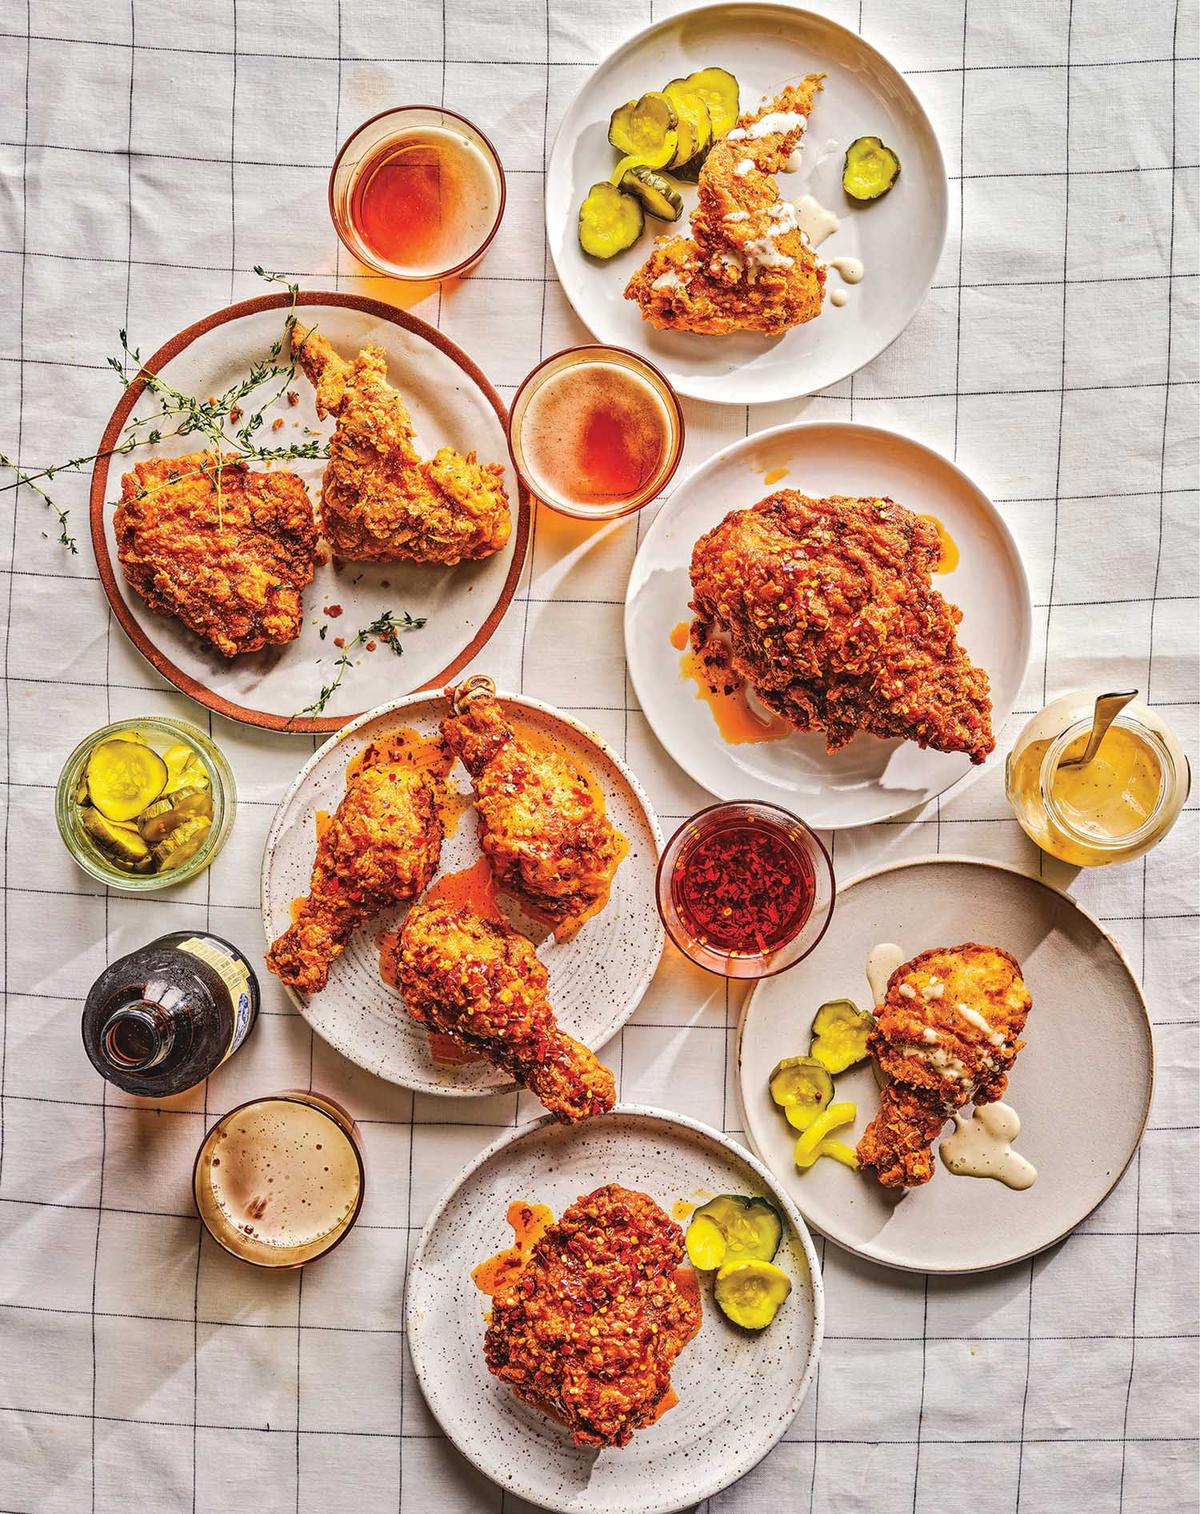 A meal of fried chicken is sure to bring loved ones to the kitchen table. (Johnny Autry)